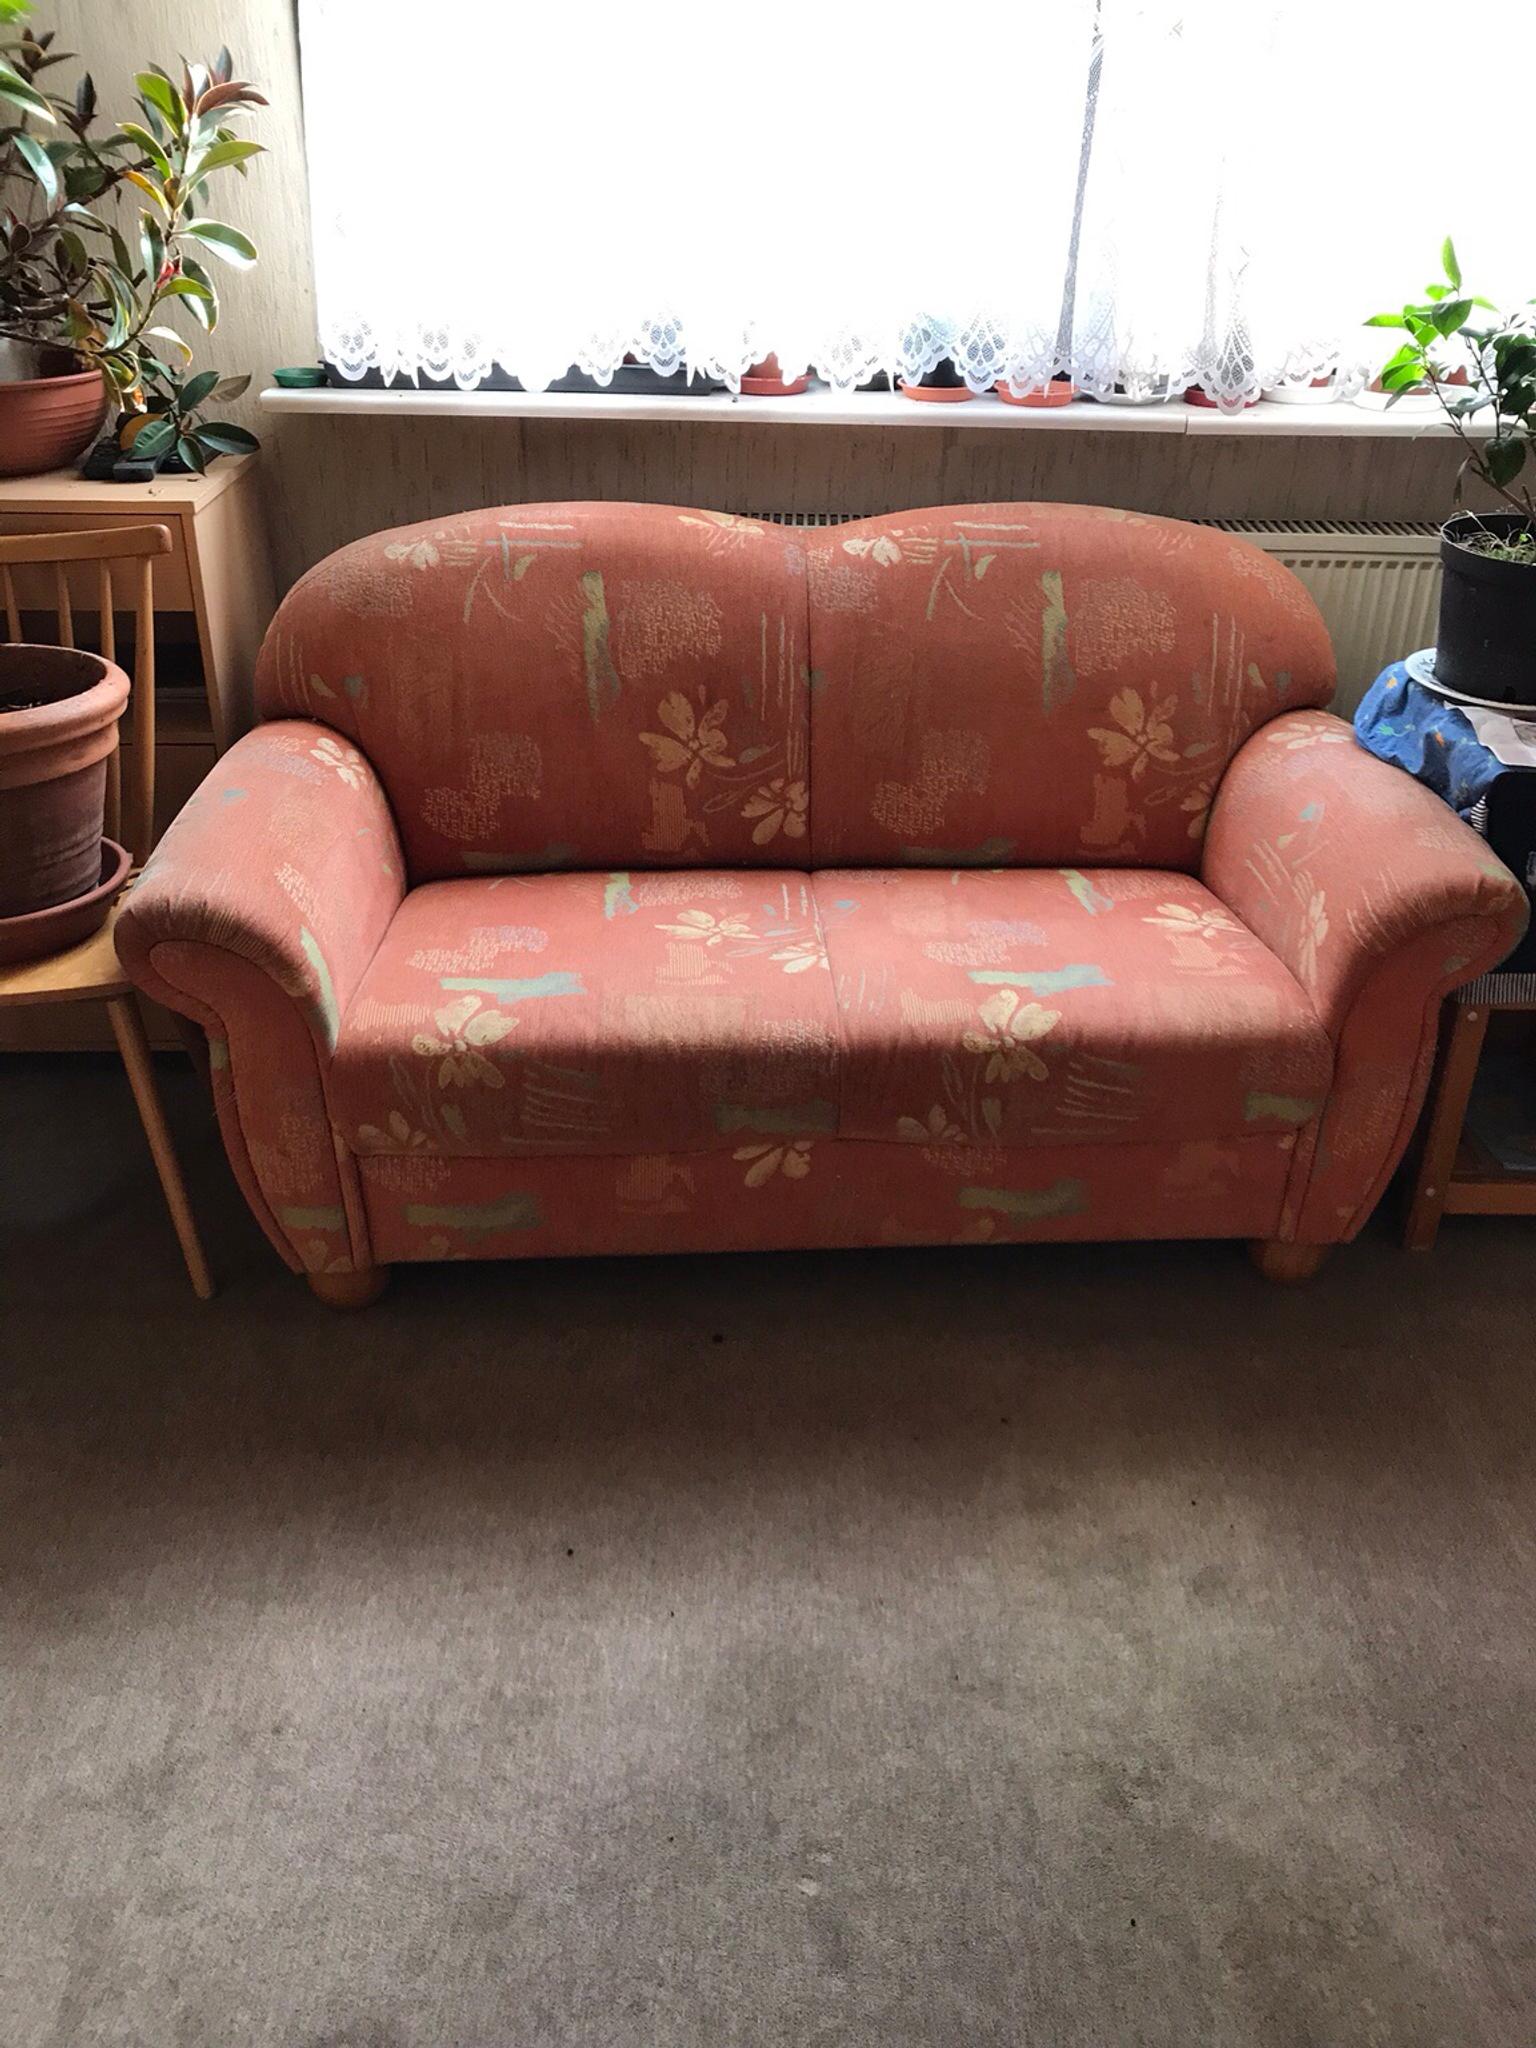 2 Sitzer Sofa Couch 150 In Bad Honnef For 25 00 For Sale Shpock